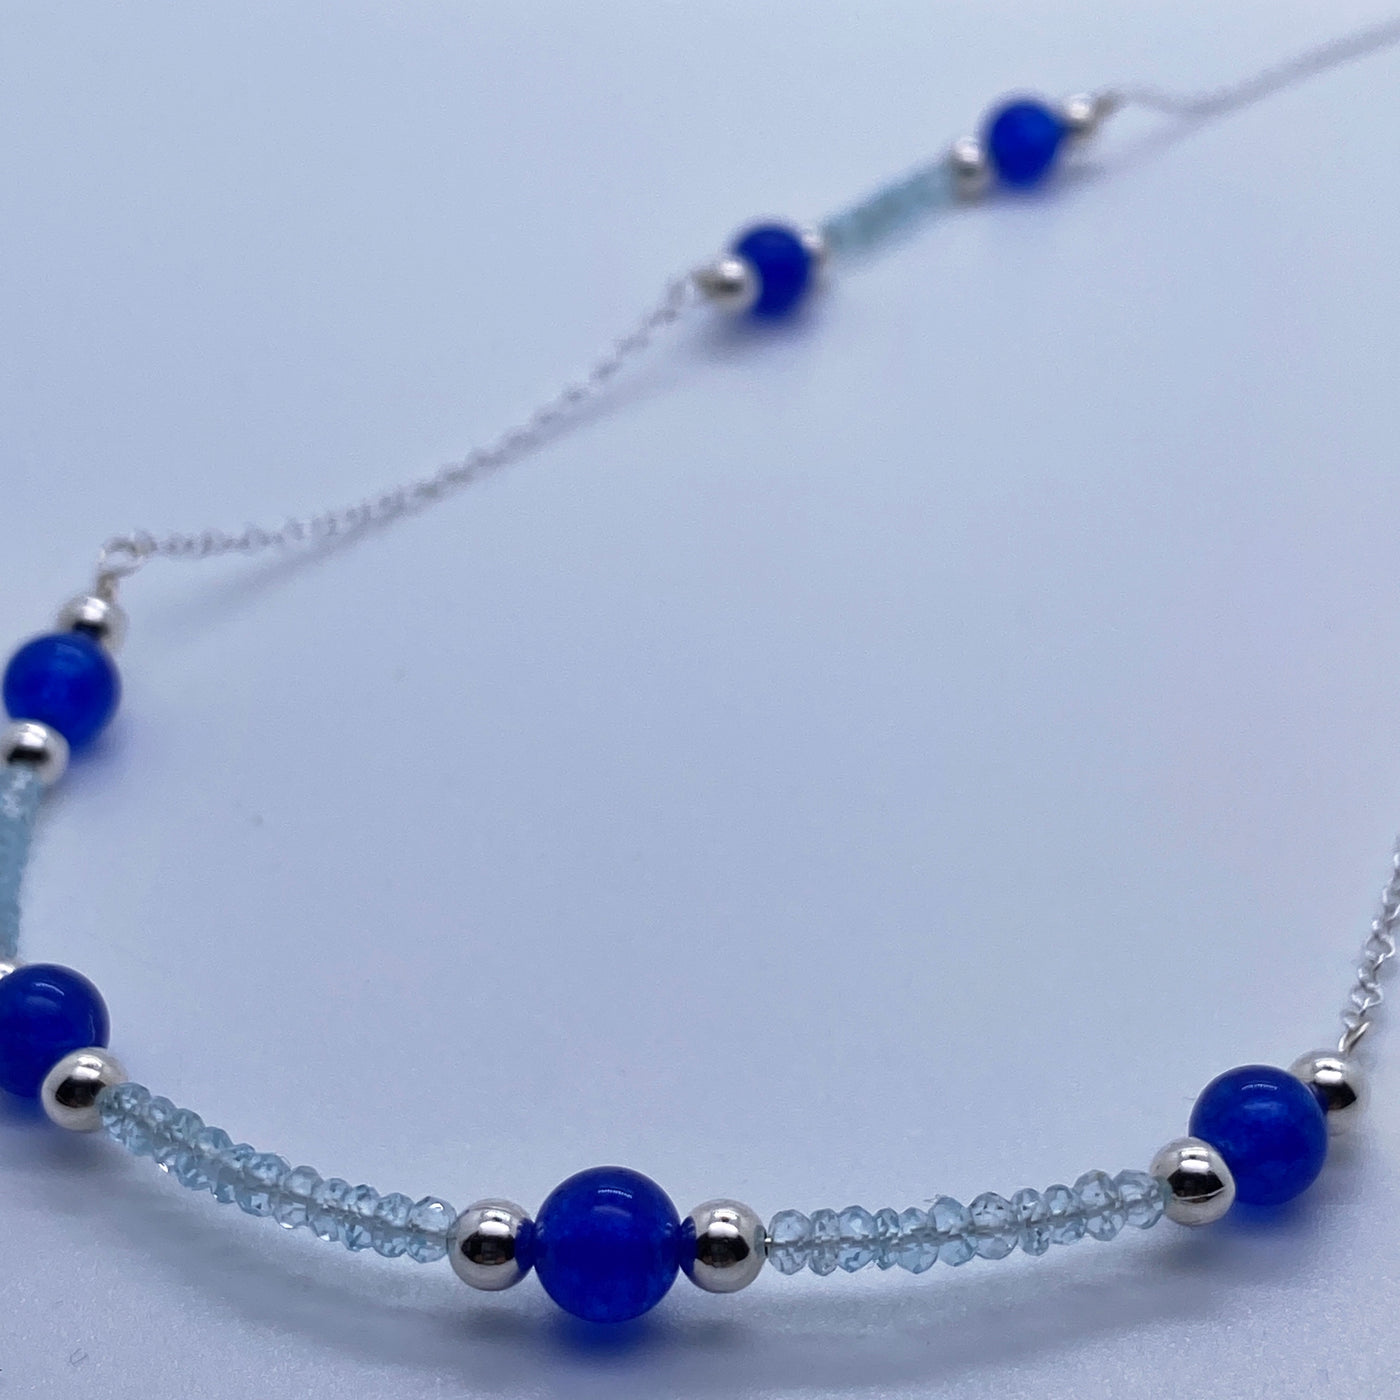 Acquamarine and blue calchedony on silver chain necklace